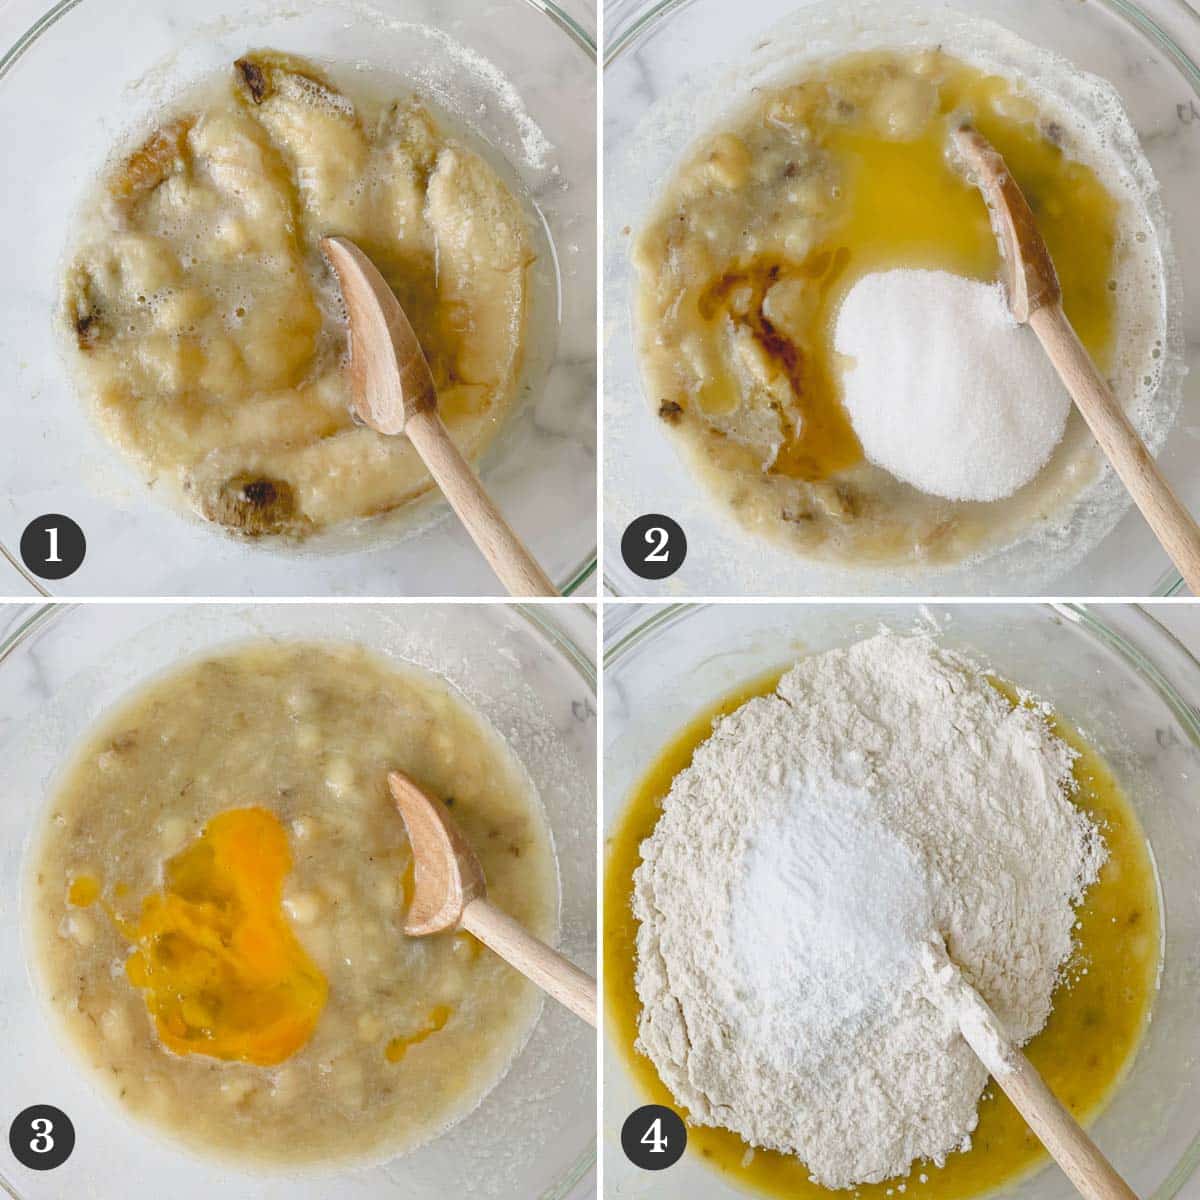 Step by step photos of making the banana bread batter.